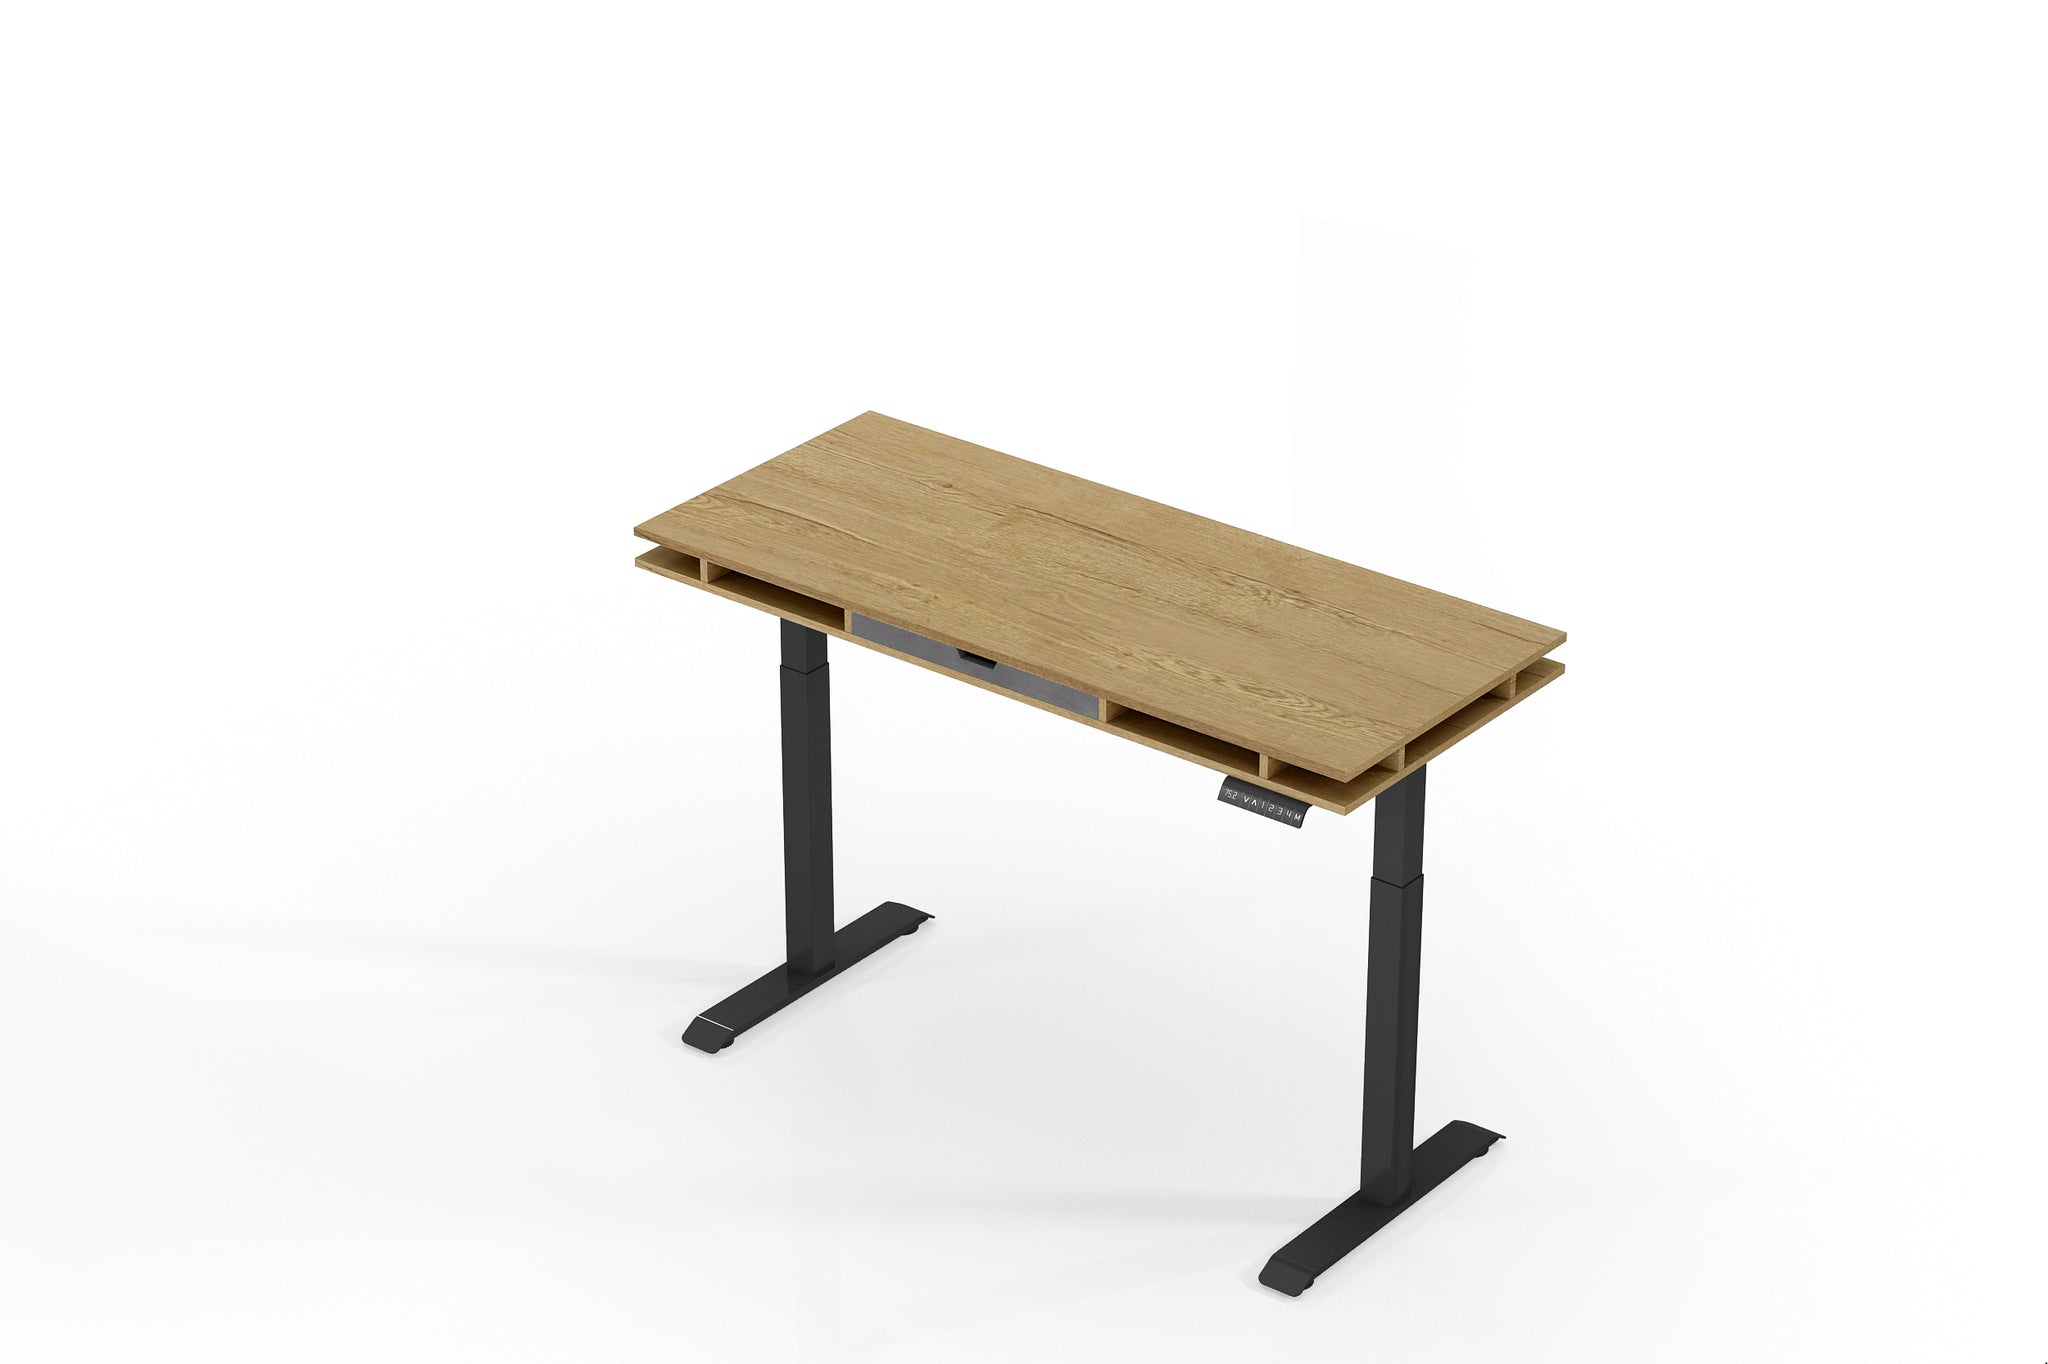 Tobacco Wood Lift table, Electrical Adjustable